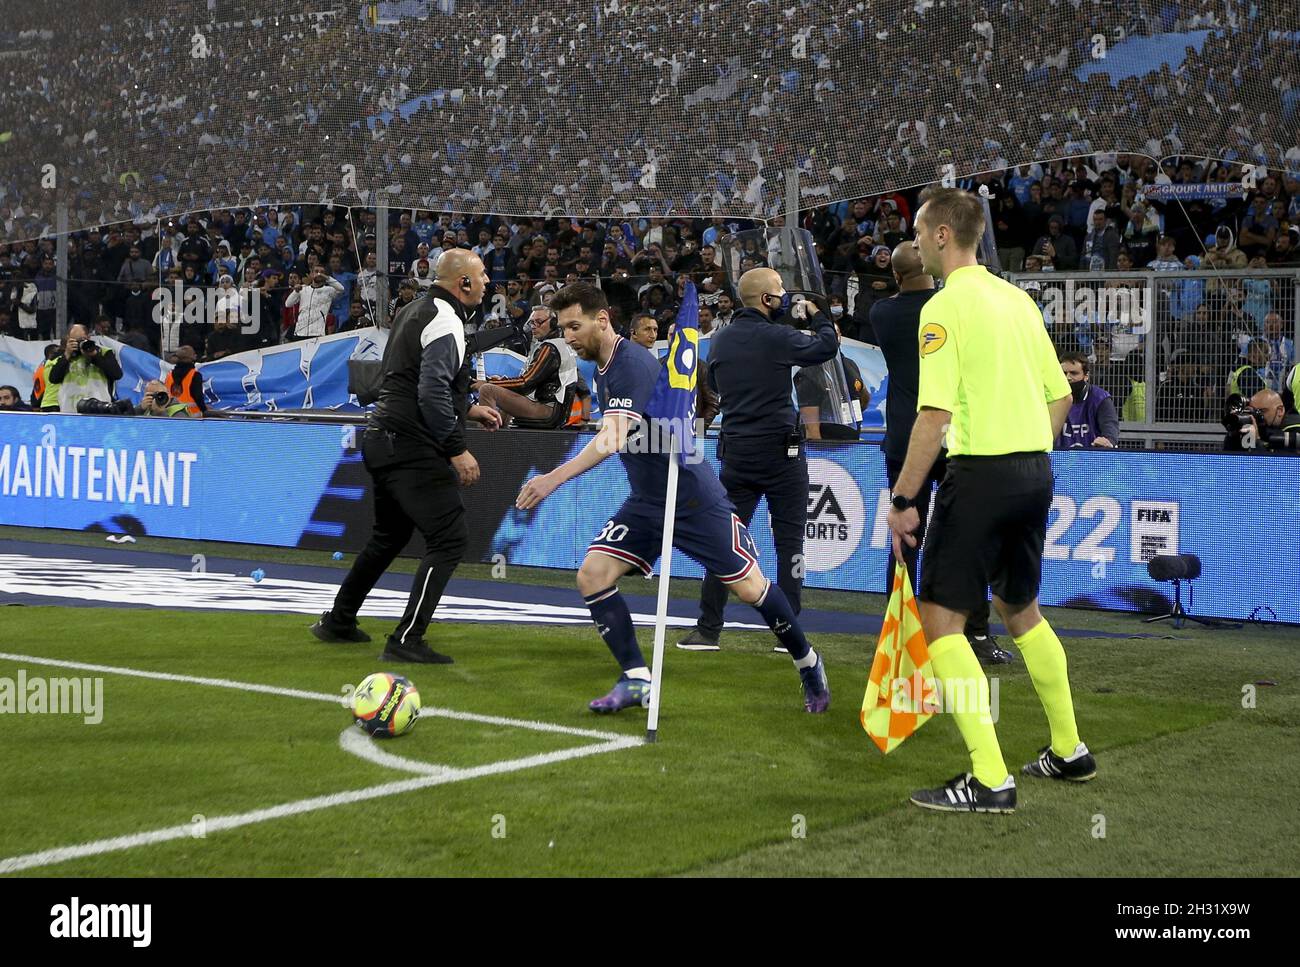 Marseille, France - October 24, 2021, Lionel Messi of PSG is protected by  security when shooting corner kicks during the French championship Ligue 1  football match between Olympique de Marseille (OM) and